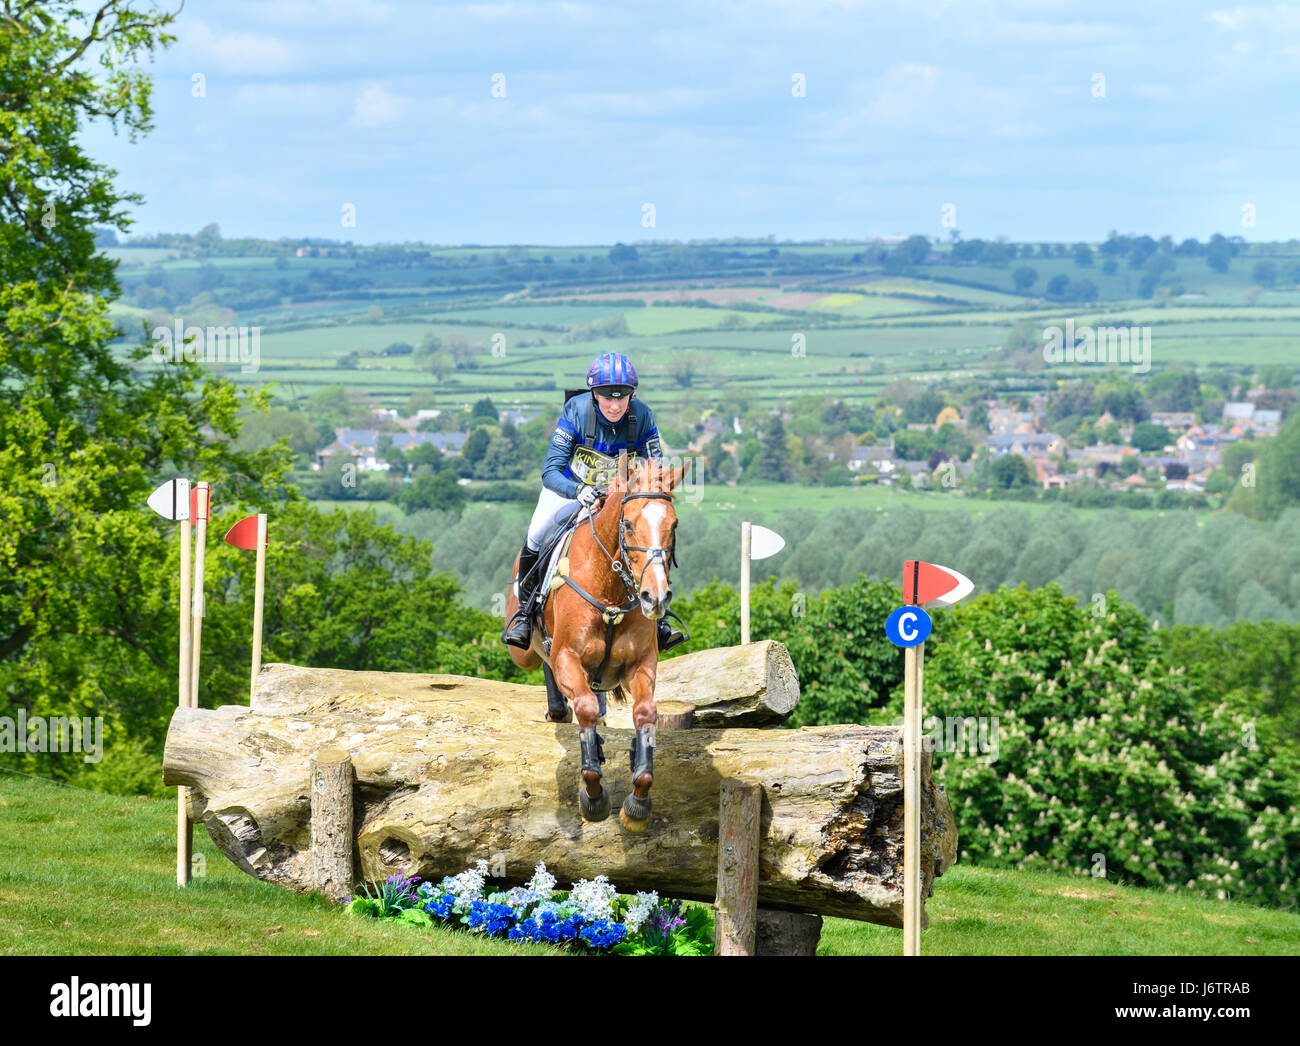 Rockingham Castle, Corby, UK. 21st May, 2017. Riding Drops of Brandy, Zara Tindall (granddaughter of Queen Elizabeth II of the United Kingdom) clears a tree trunk obstacle with the Welland valley in the background on a sunny day during the cross country phase of the Rockingham International Horse Trials in the grounds of the Norman castle at Rockingham, Corby, England on 21st May 2017. Credit: miscellany/Alamy Live News Stock Photo